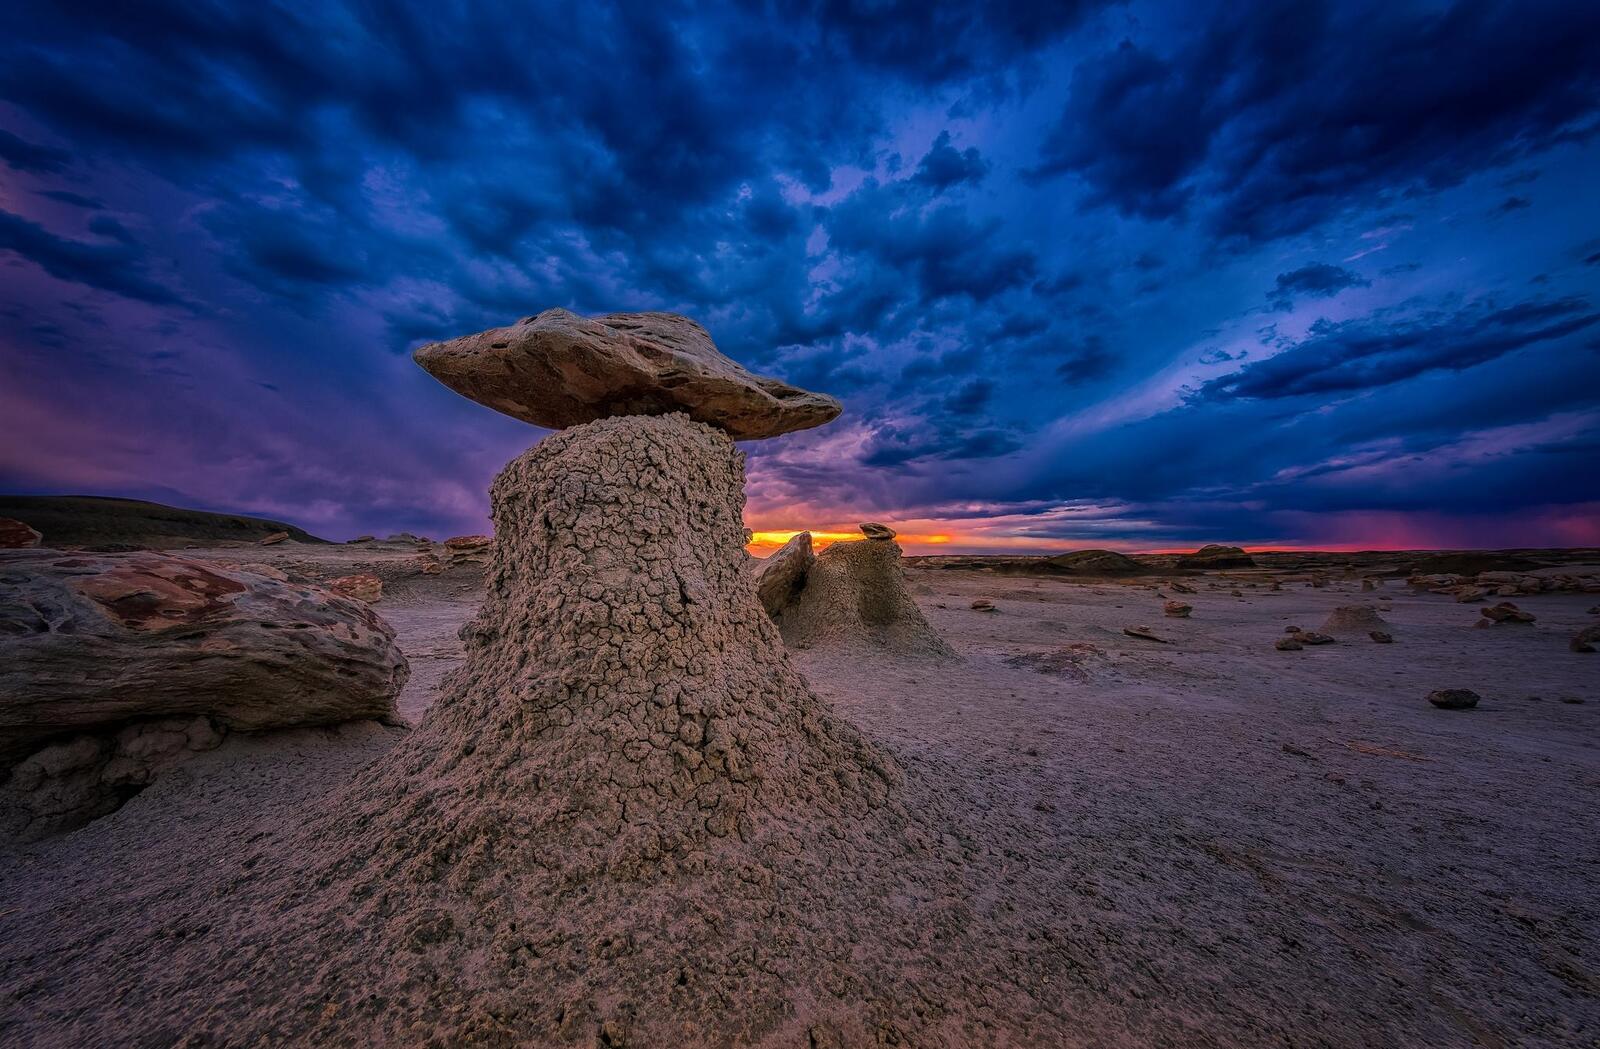 Wallpapers Bisti Badlands New Mexico USA on the desktop